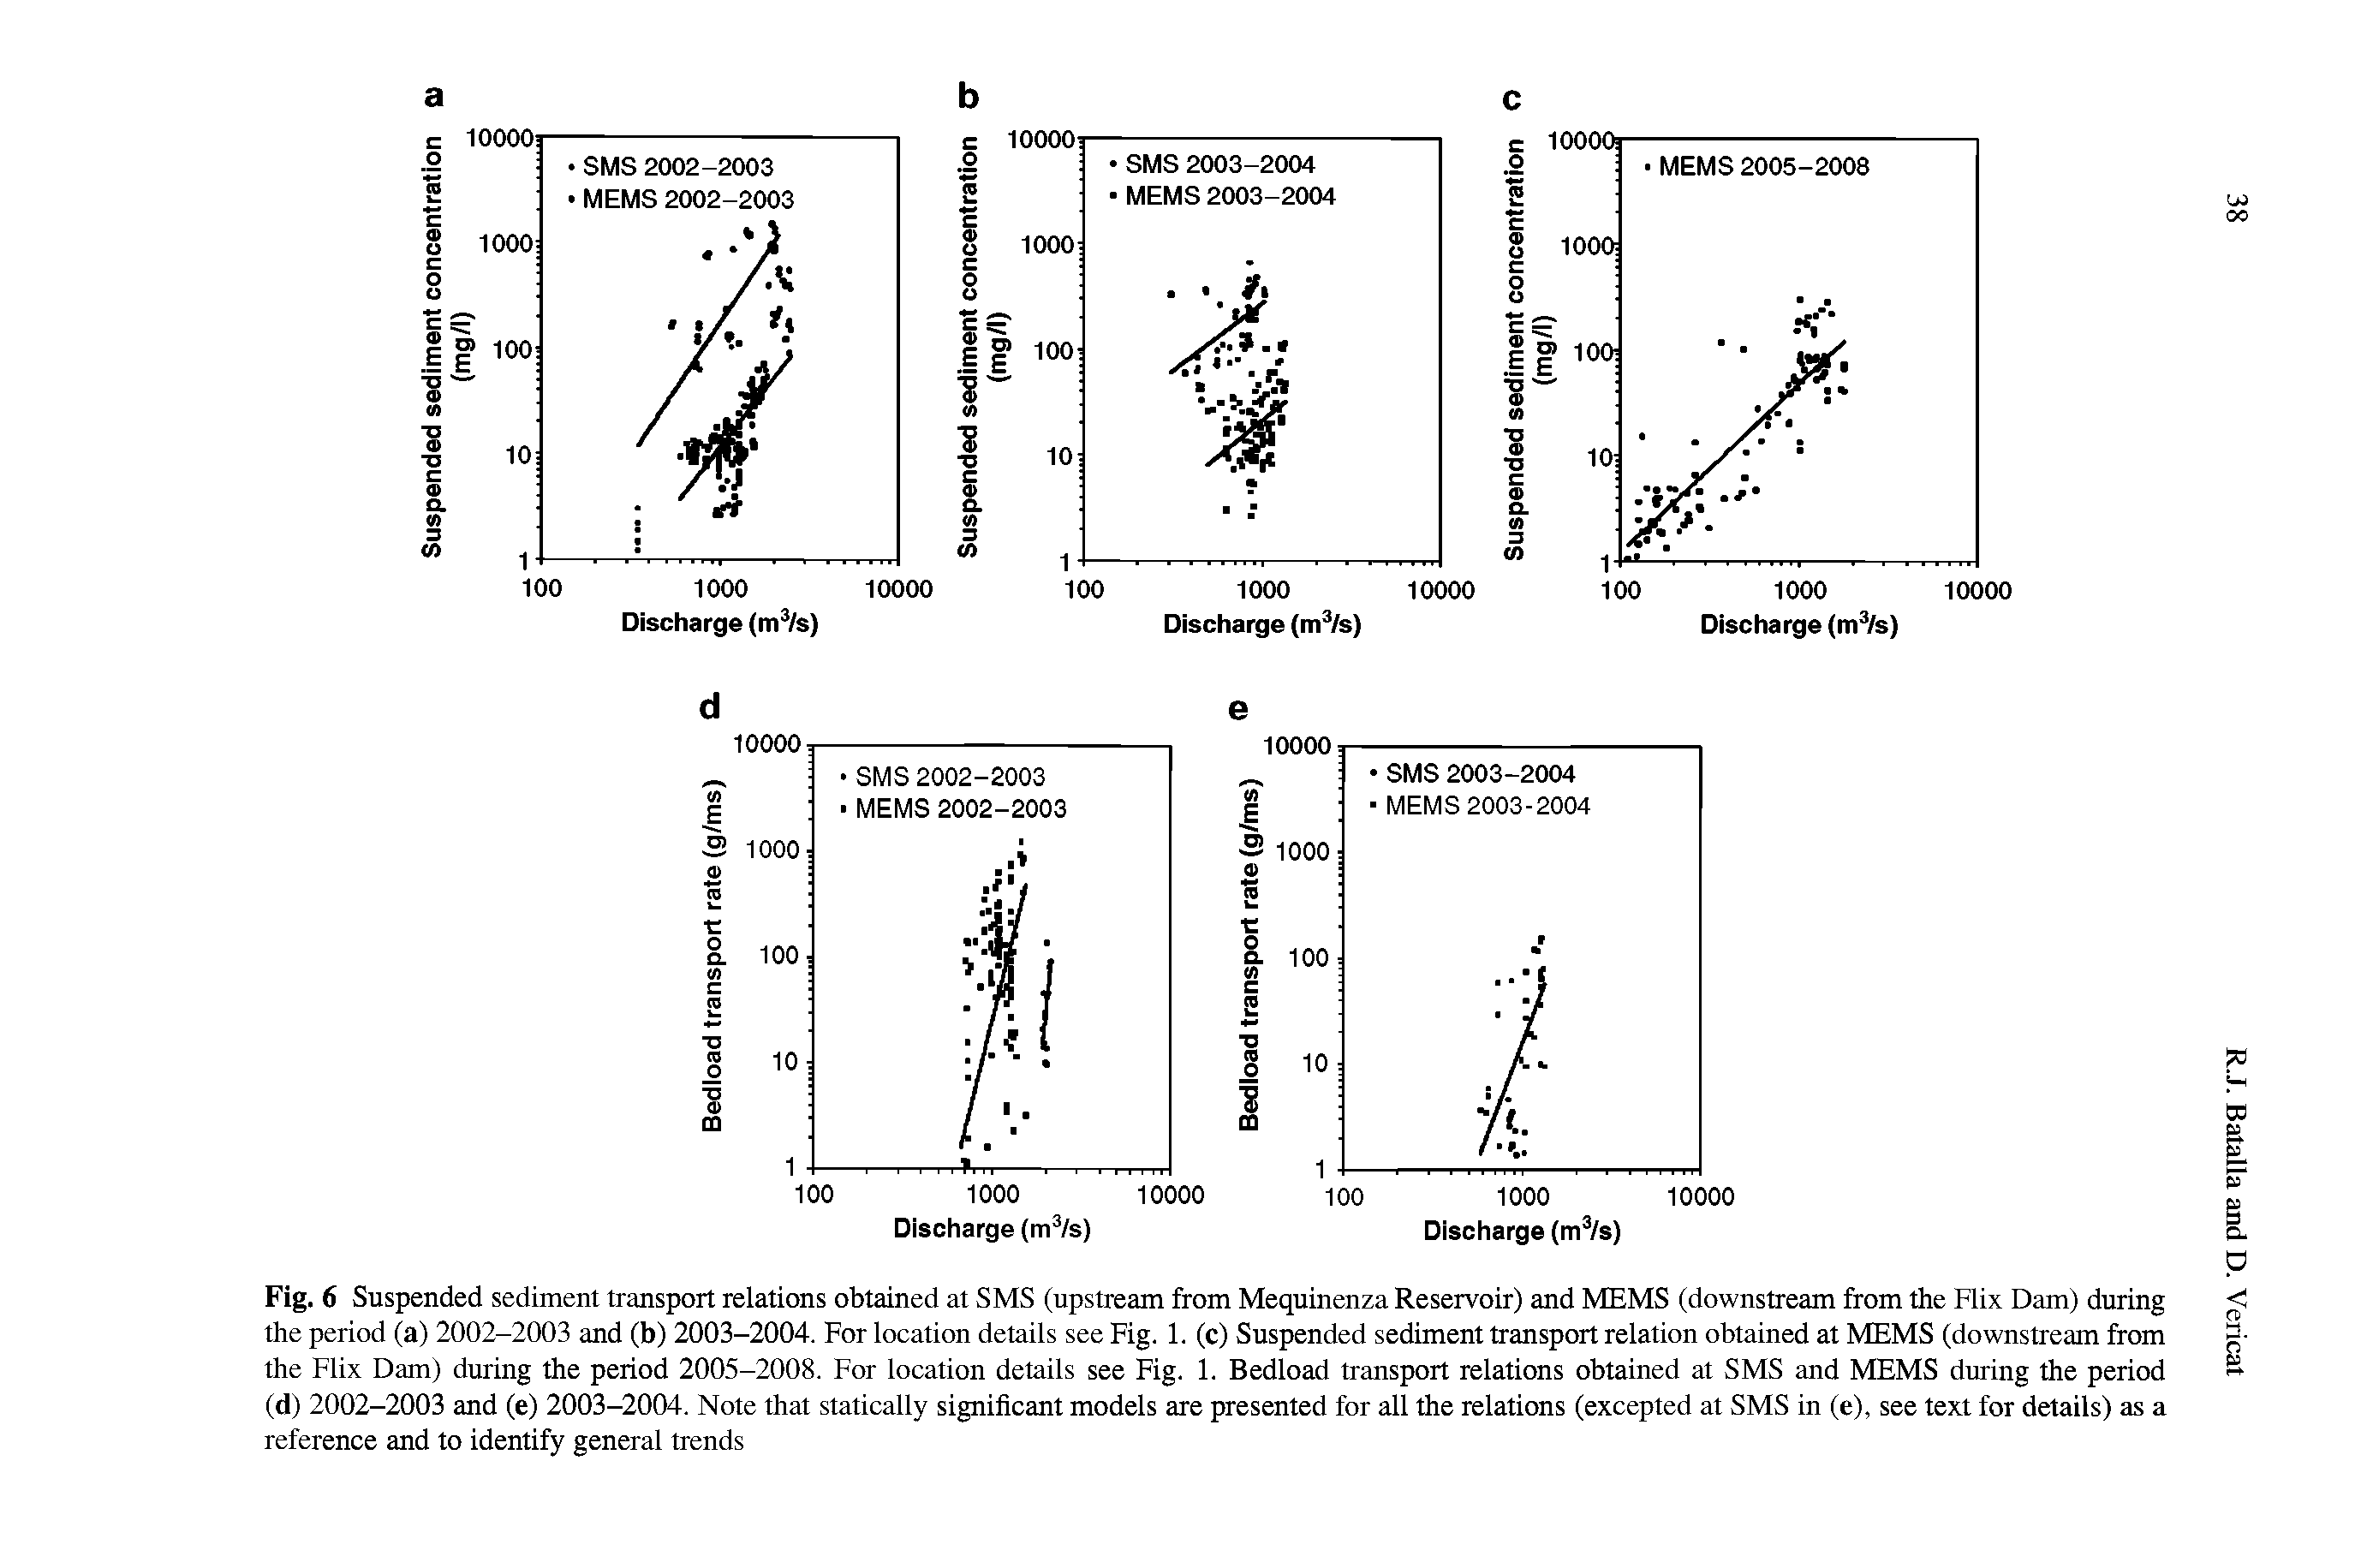 Fig. 6 Suspended sediment transport relations obtained at SMS (upstream from Mequinenza Reservoir) and MEMS (downstream from the Flix Dam) during the period (a) 2002-2003 and (b) 2003-2004. For location details see Fig. 1. (c) Suspended sediment transport relation obtained at MEMS (downstream from the Flix Dam) during the period 2005-2008. For location details see Fig. 1. Bedload transport relations obtained at SMS and MEMS during the period (d) 2002-2003 and (e) 2003-2004. Note that statically significant models are presented for all the relations (excepted at SMS in (e), see text for details) as a reference and to identify general trends...